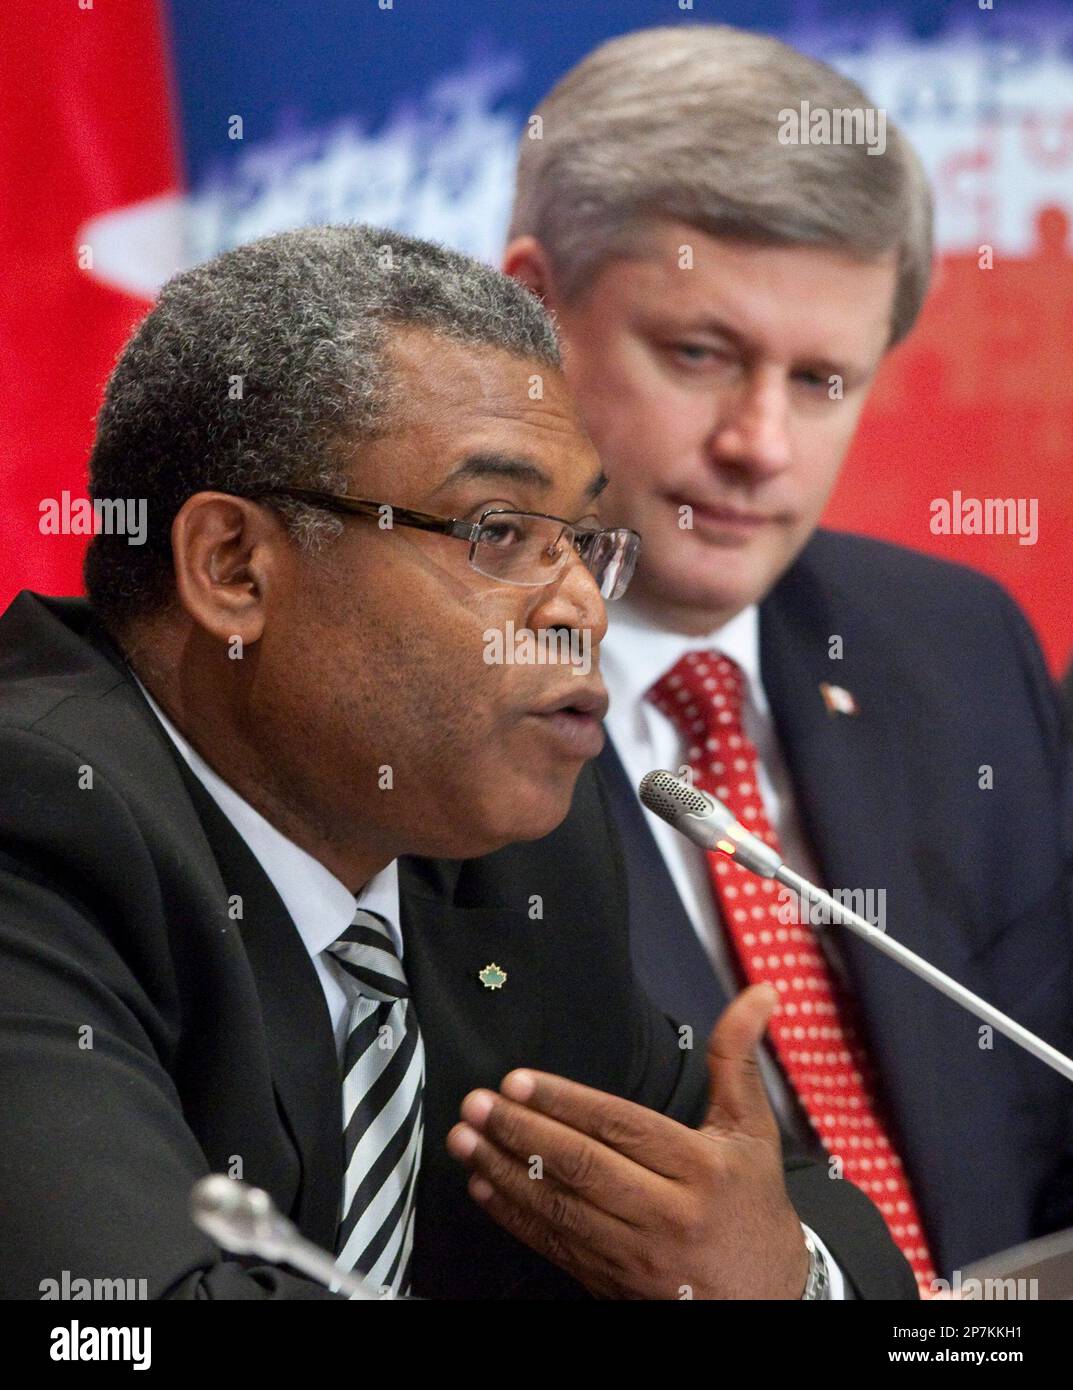 Prime Minister Stephen Harper, right, listens to Haitian Prime Minister Jean-Max  Bellerive address a conference looking at the future of Haiti Monday  January 25, 2010 in Montreal. (AP Photo/The Canadian Press, Paul